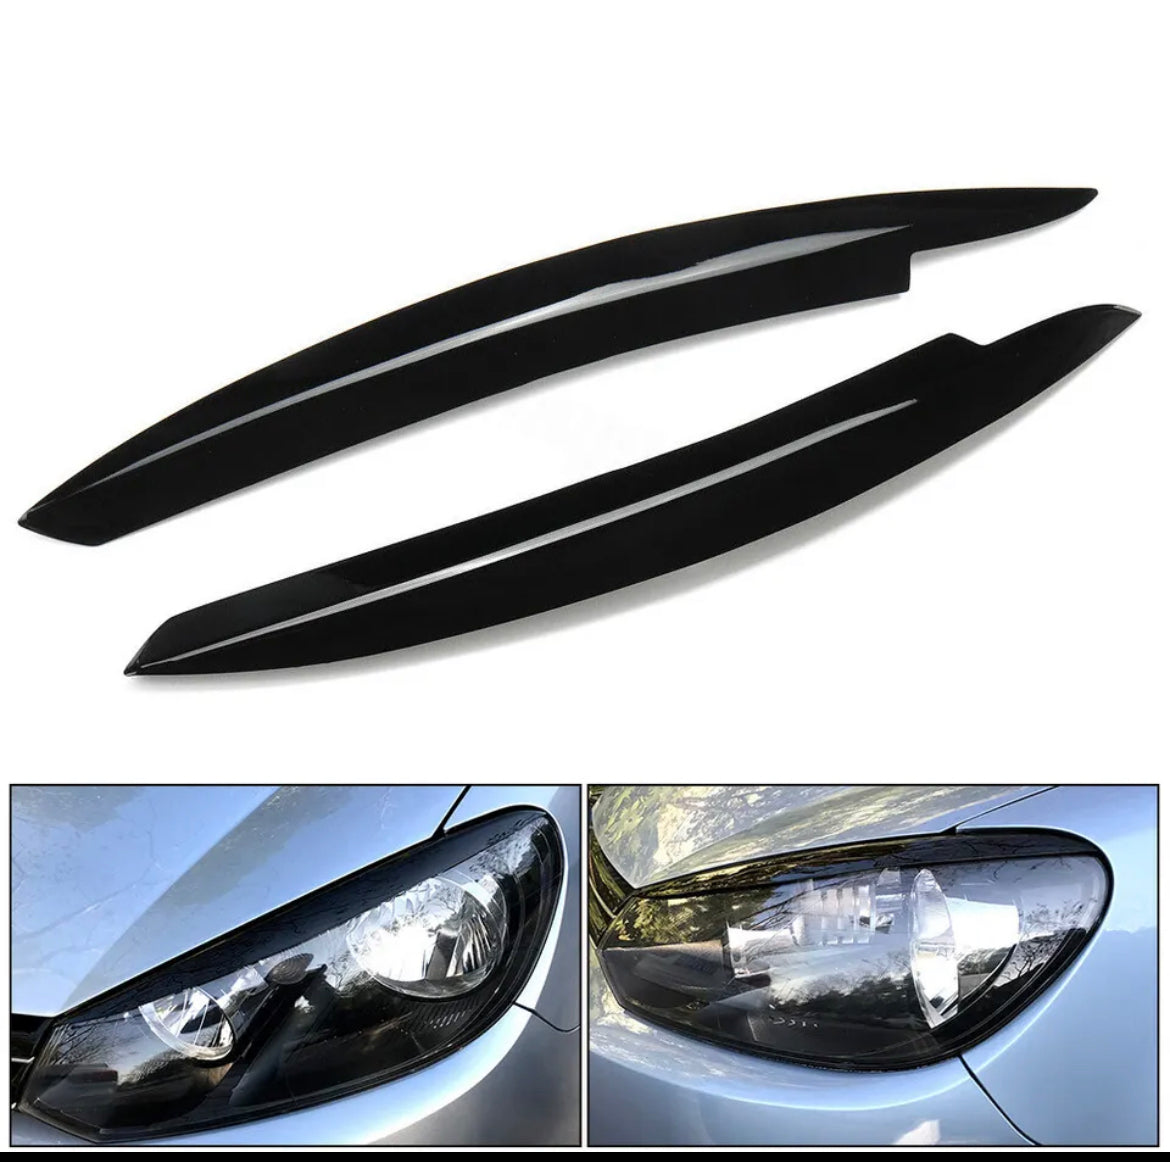 Eyebrows Brows Eyelid Cover For VW GOLF 6 MK6 2008-2013